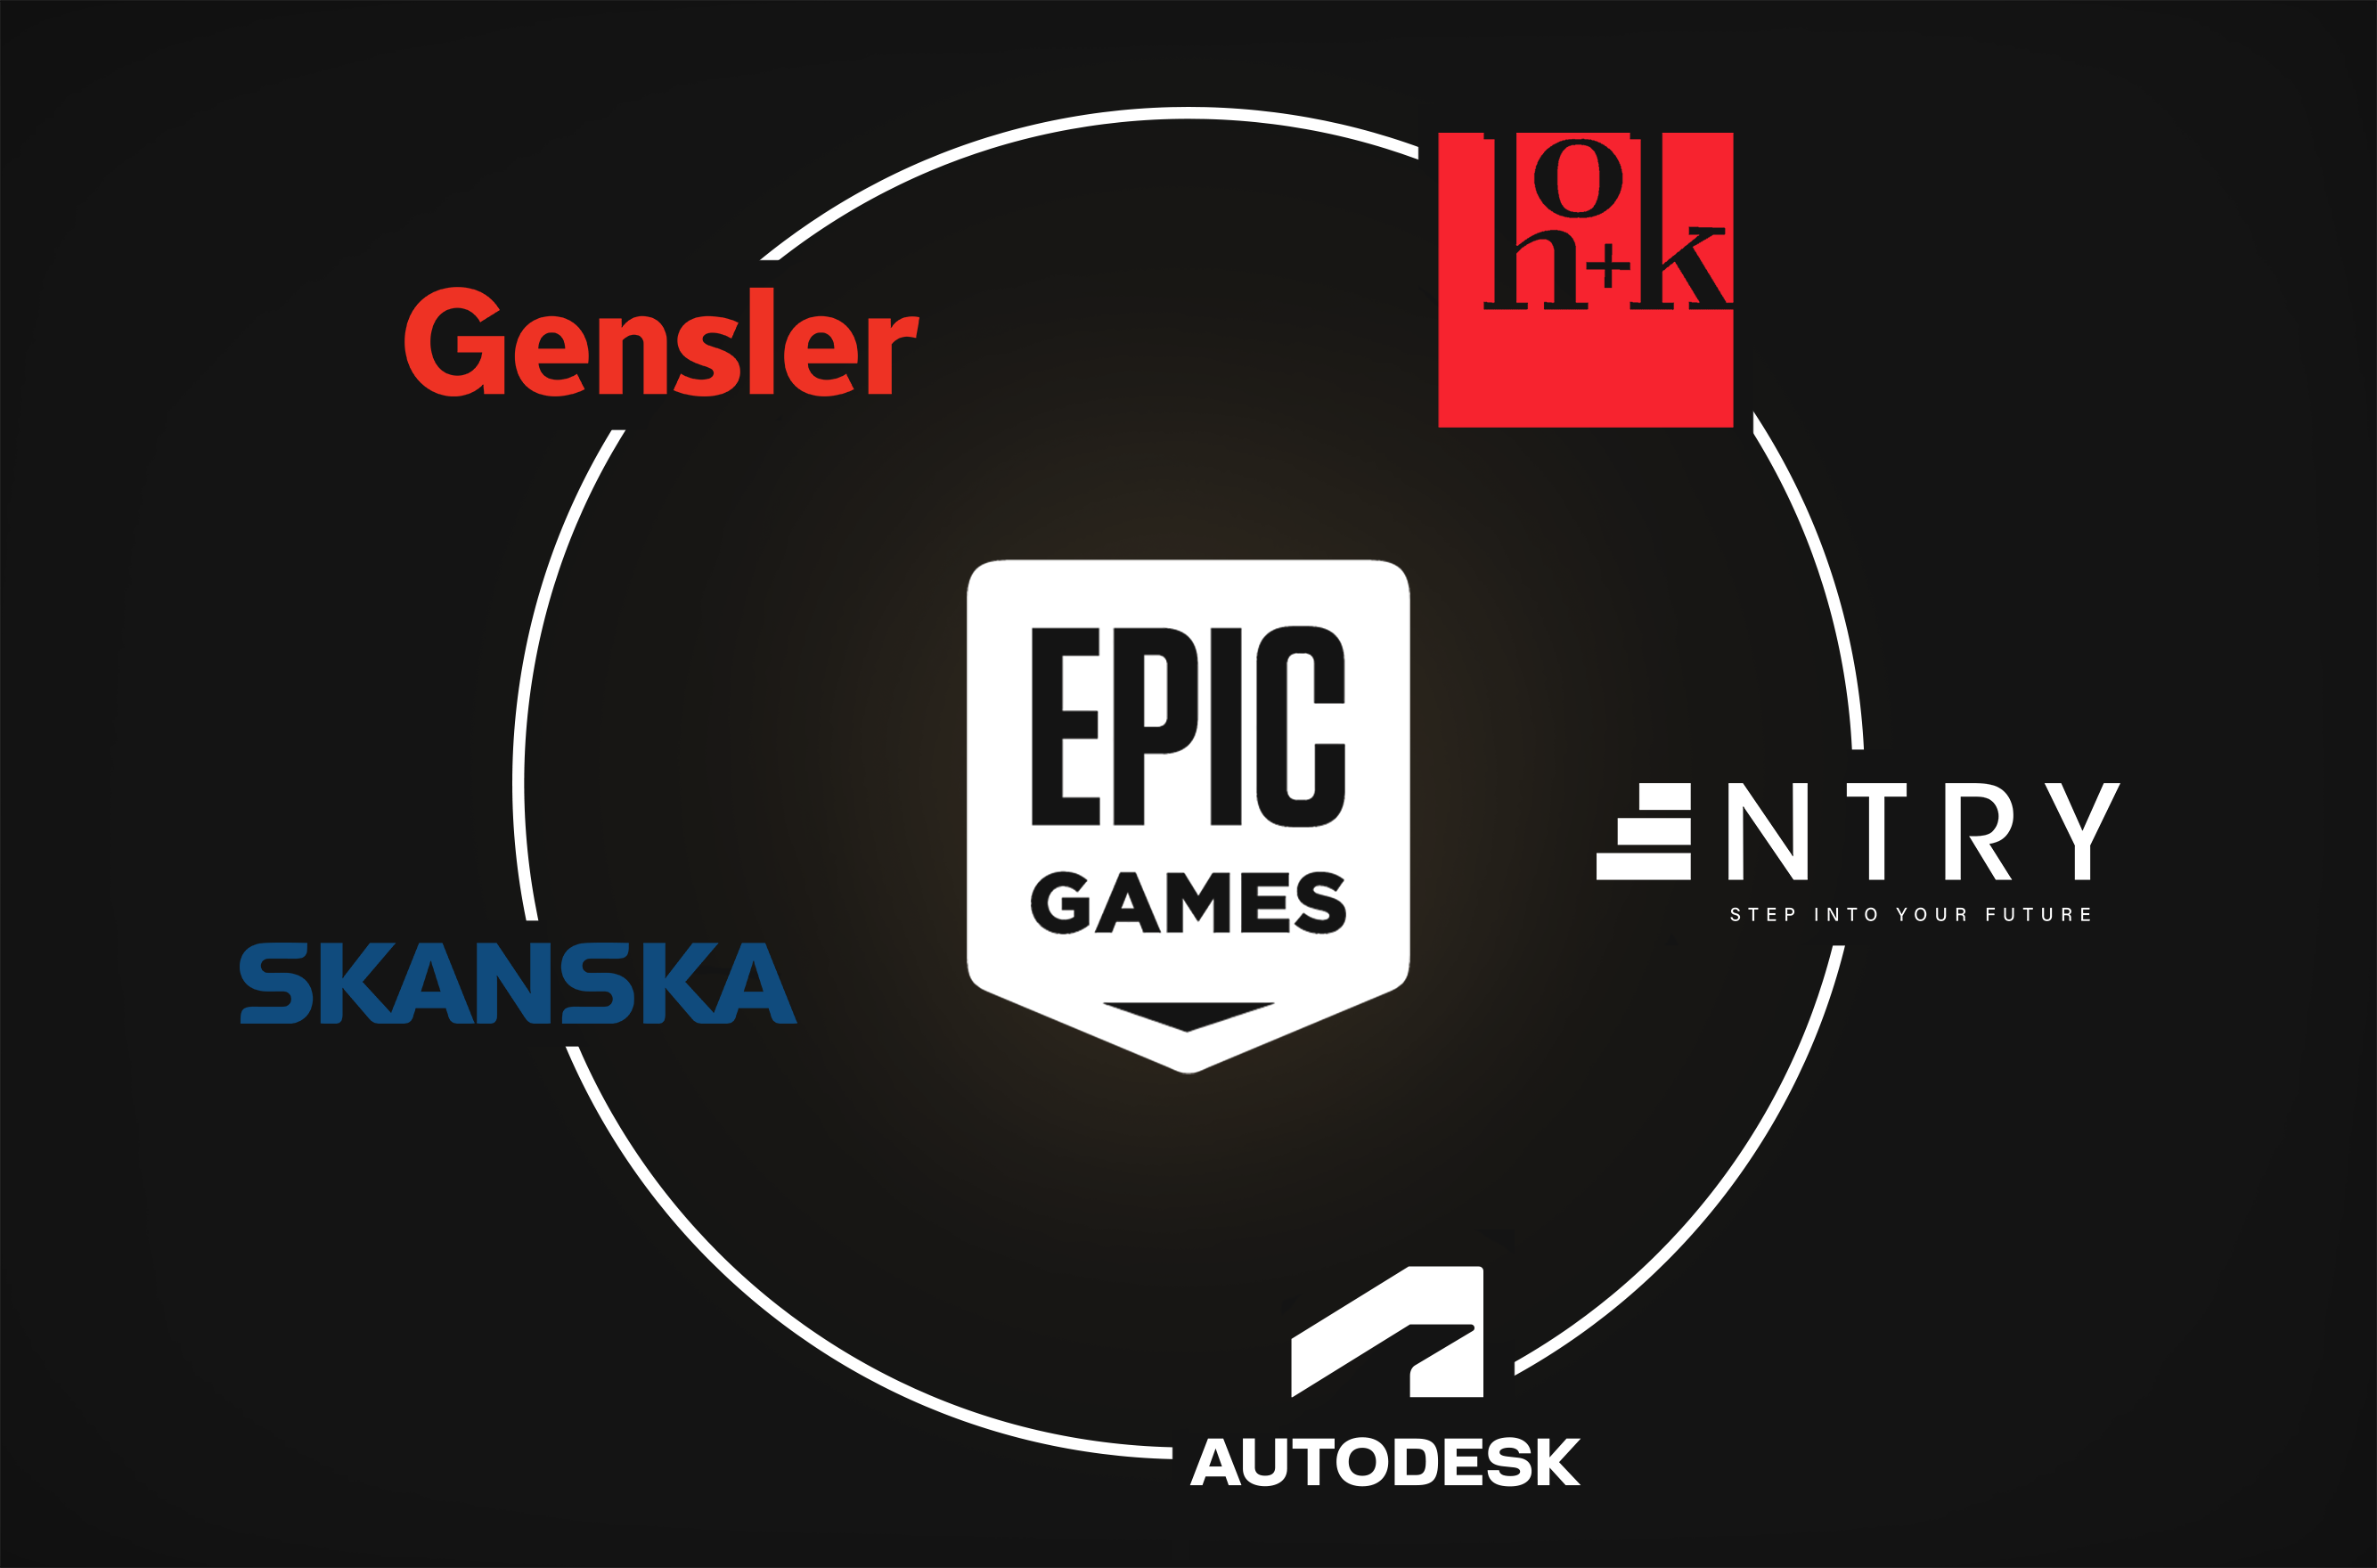 Epic Games company logo surrounded by Autodesk logo, AEC firm logos, and NTRY logo.